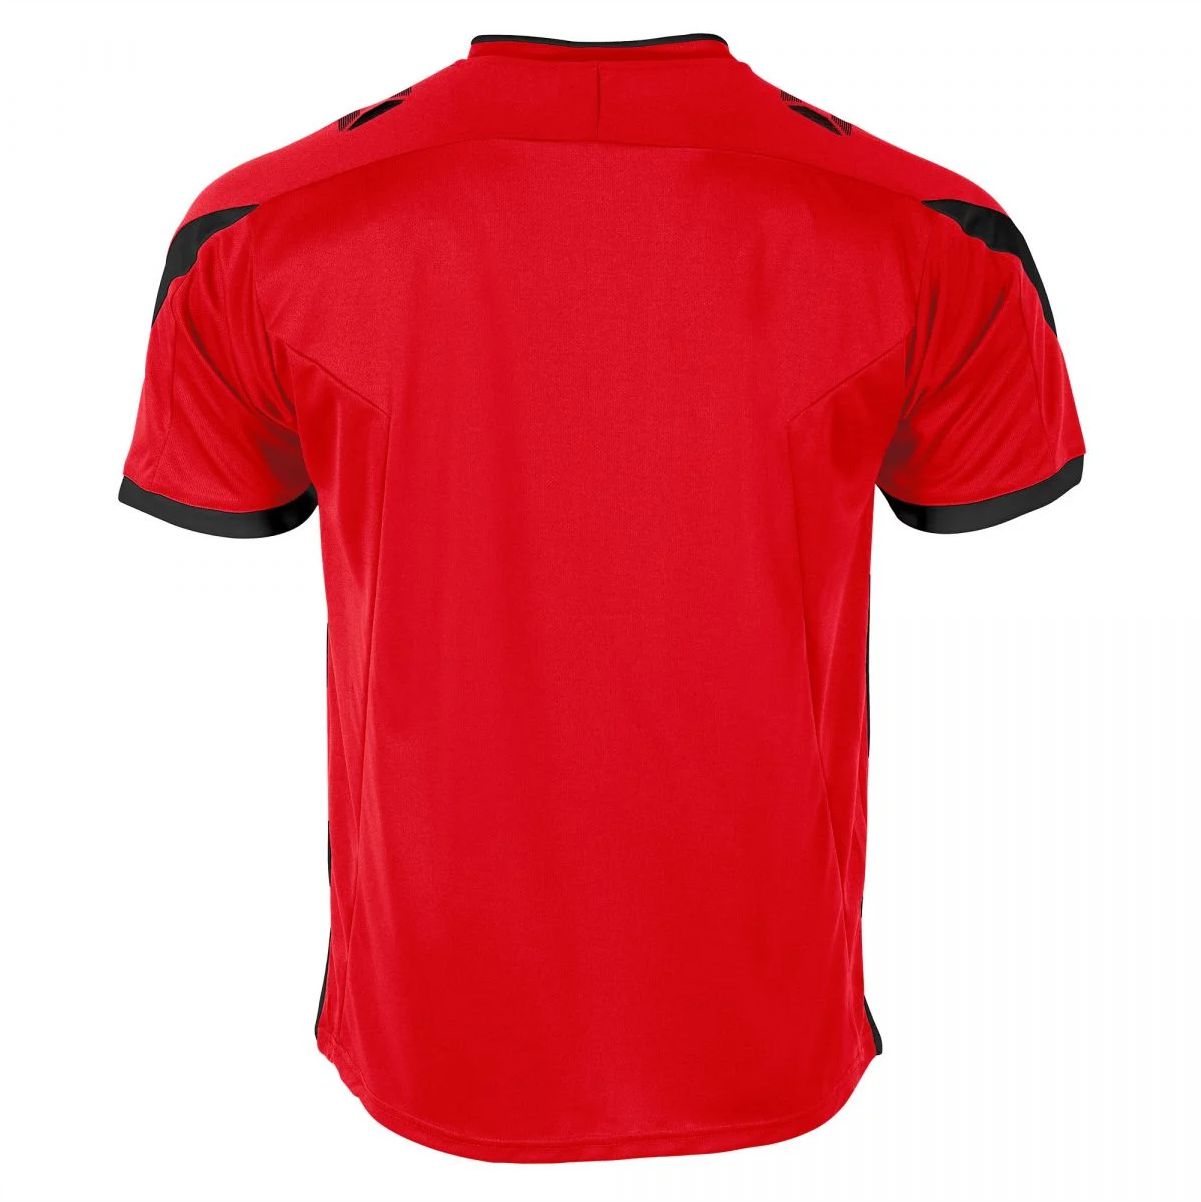 Stanno - Drive Shirt - Red & Black